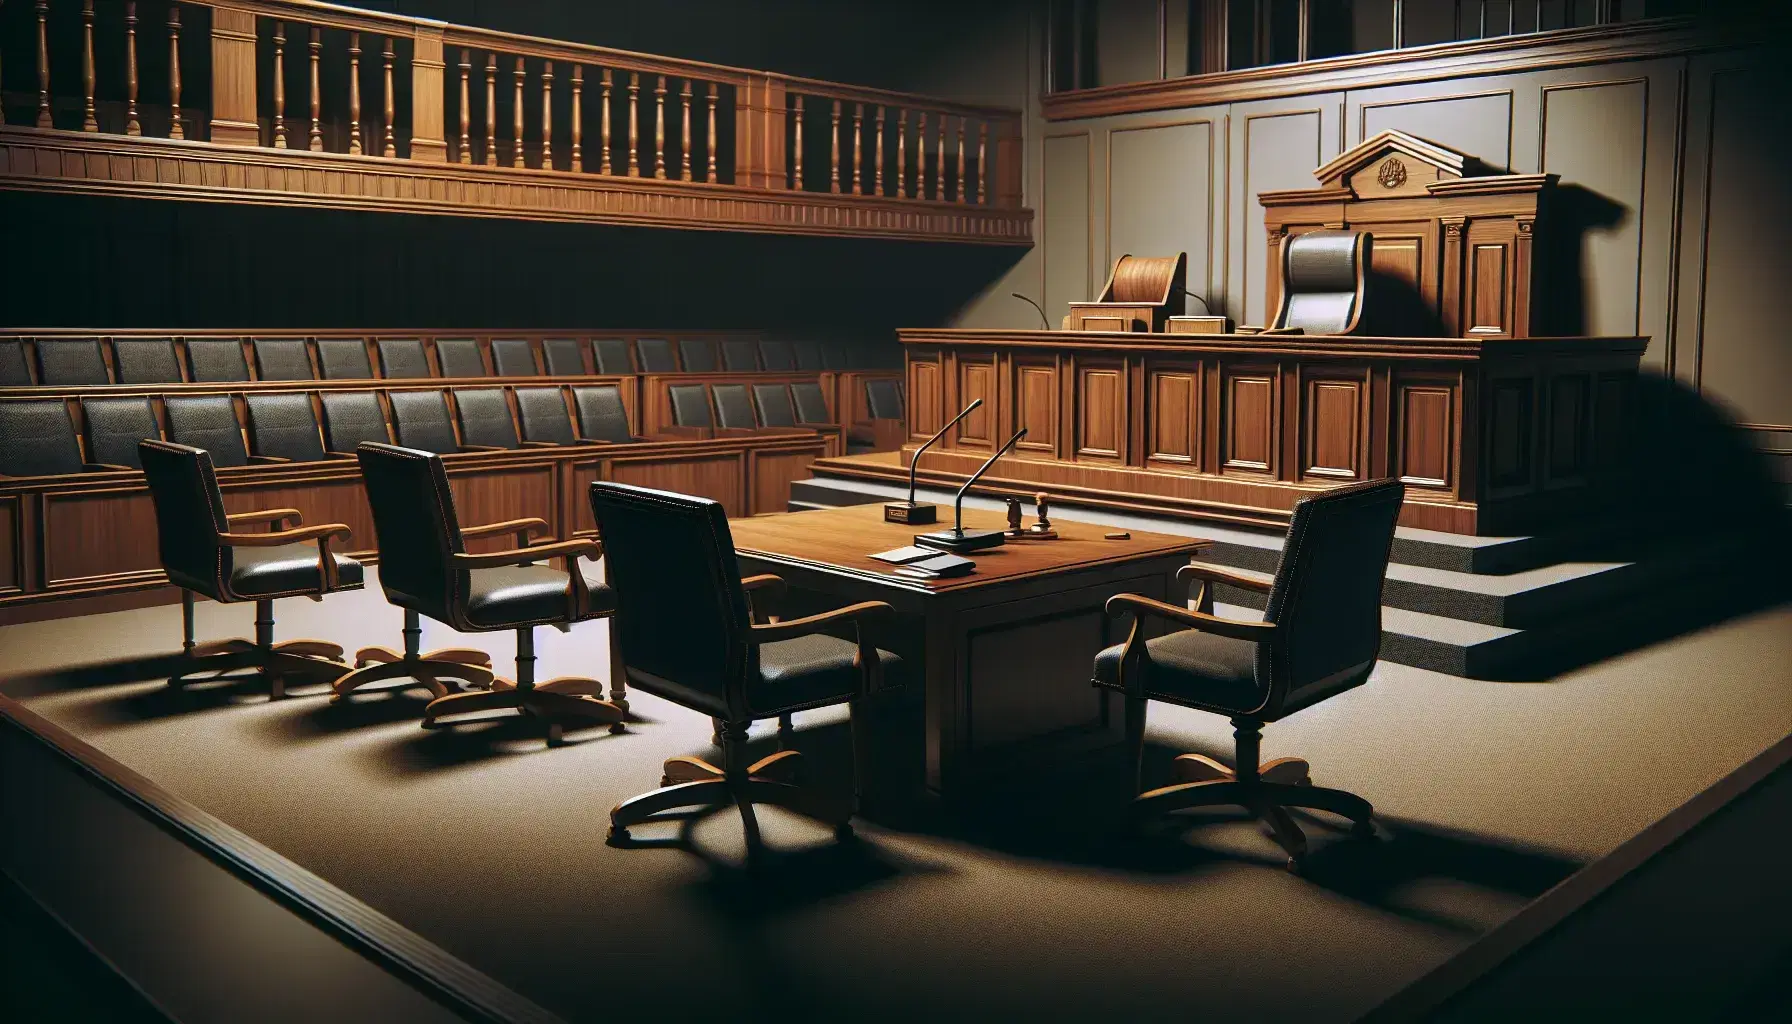 Courtroom with wooden judge's bench, empty chair, witness stand with microphone, table for lawyers and benches for spectators.